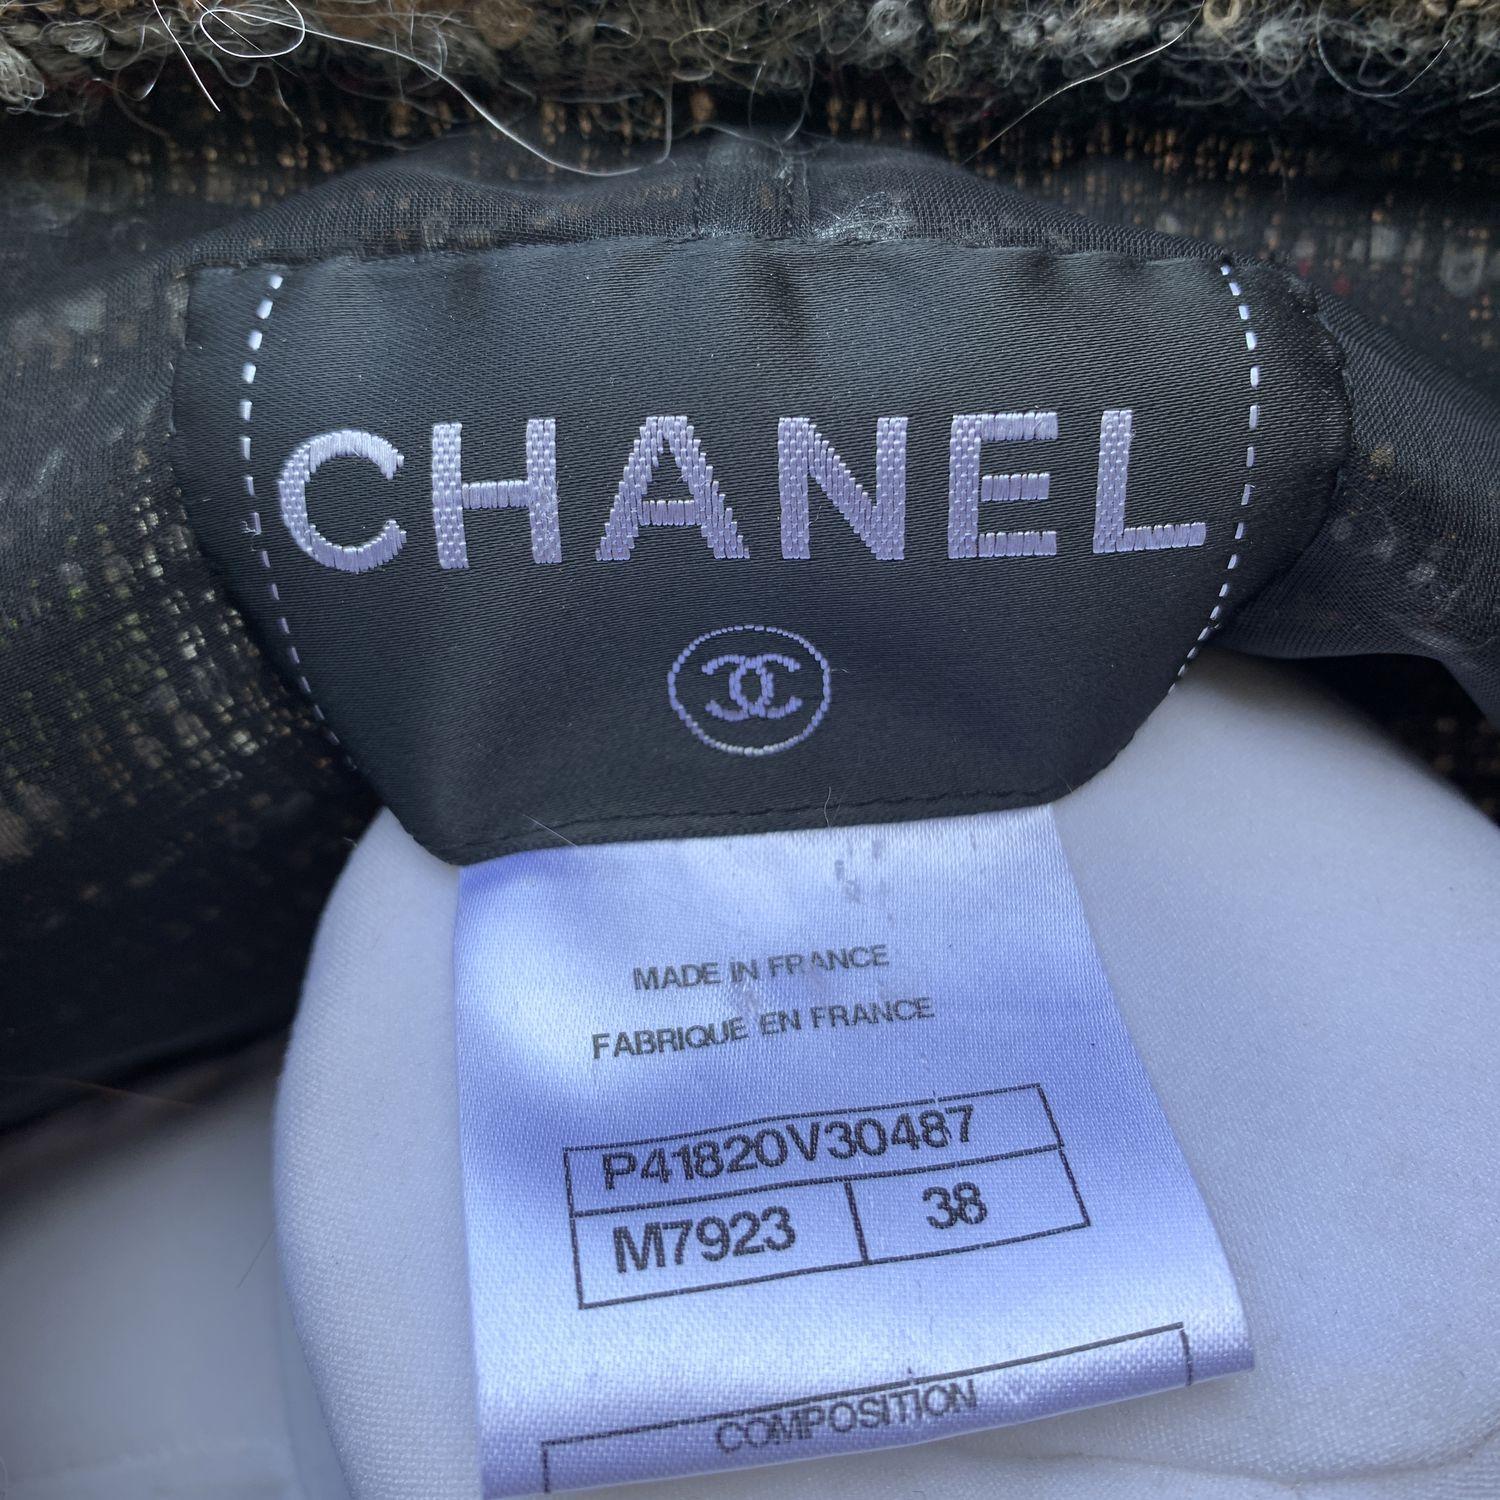 Chanel 2011 Multicolor Wool Jacket Cardigan Size 38 FR For Sale 2